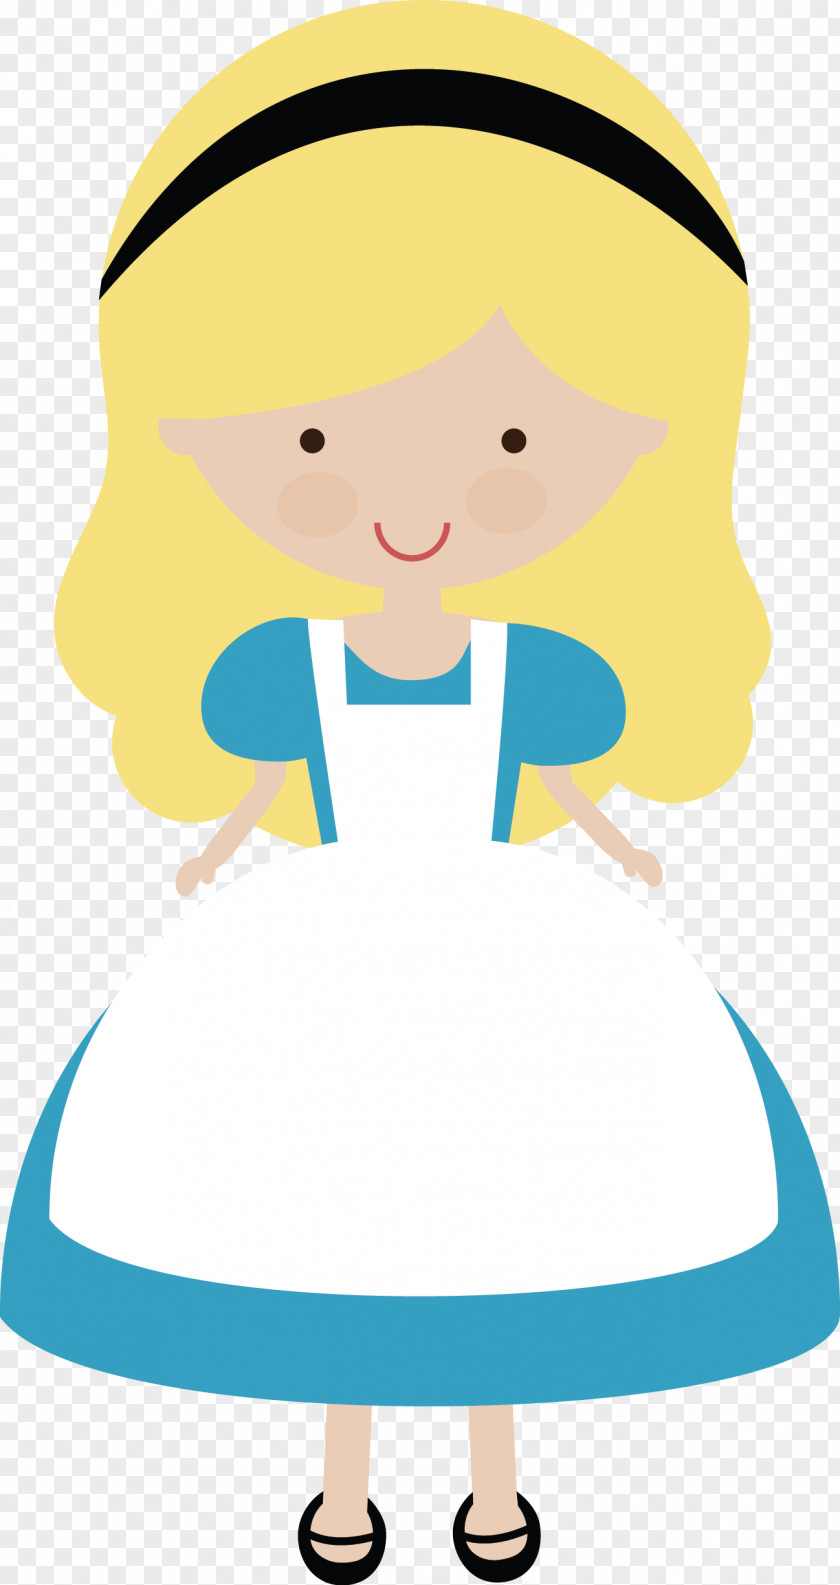 Tasarim Clip Art Scalable Vector Graphics Alice's Adventures In Wonderland Openclipart Portable Network PNG